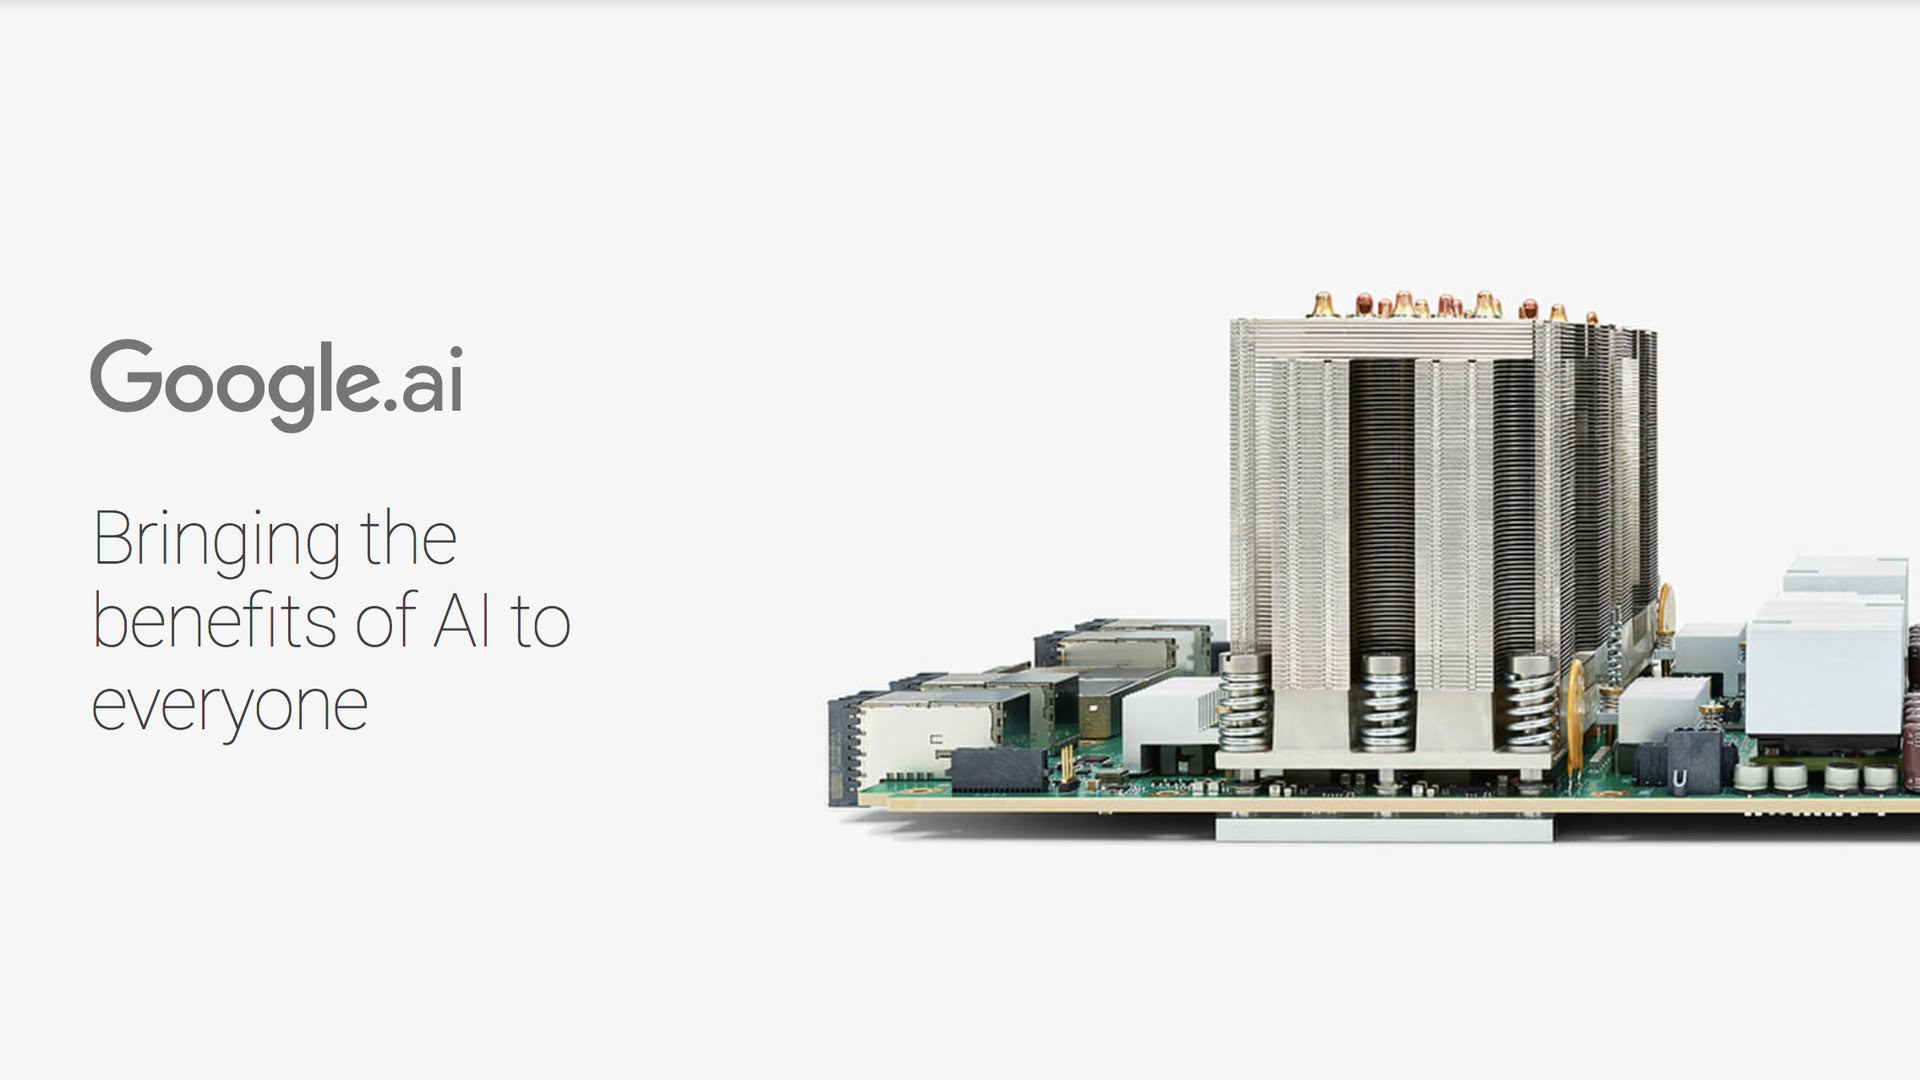 A poster promoting Google AI showing some text and a circuit board.